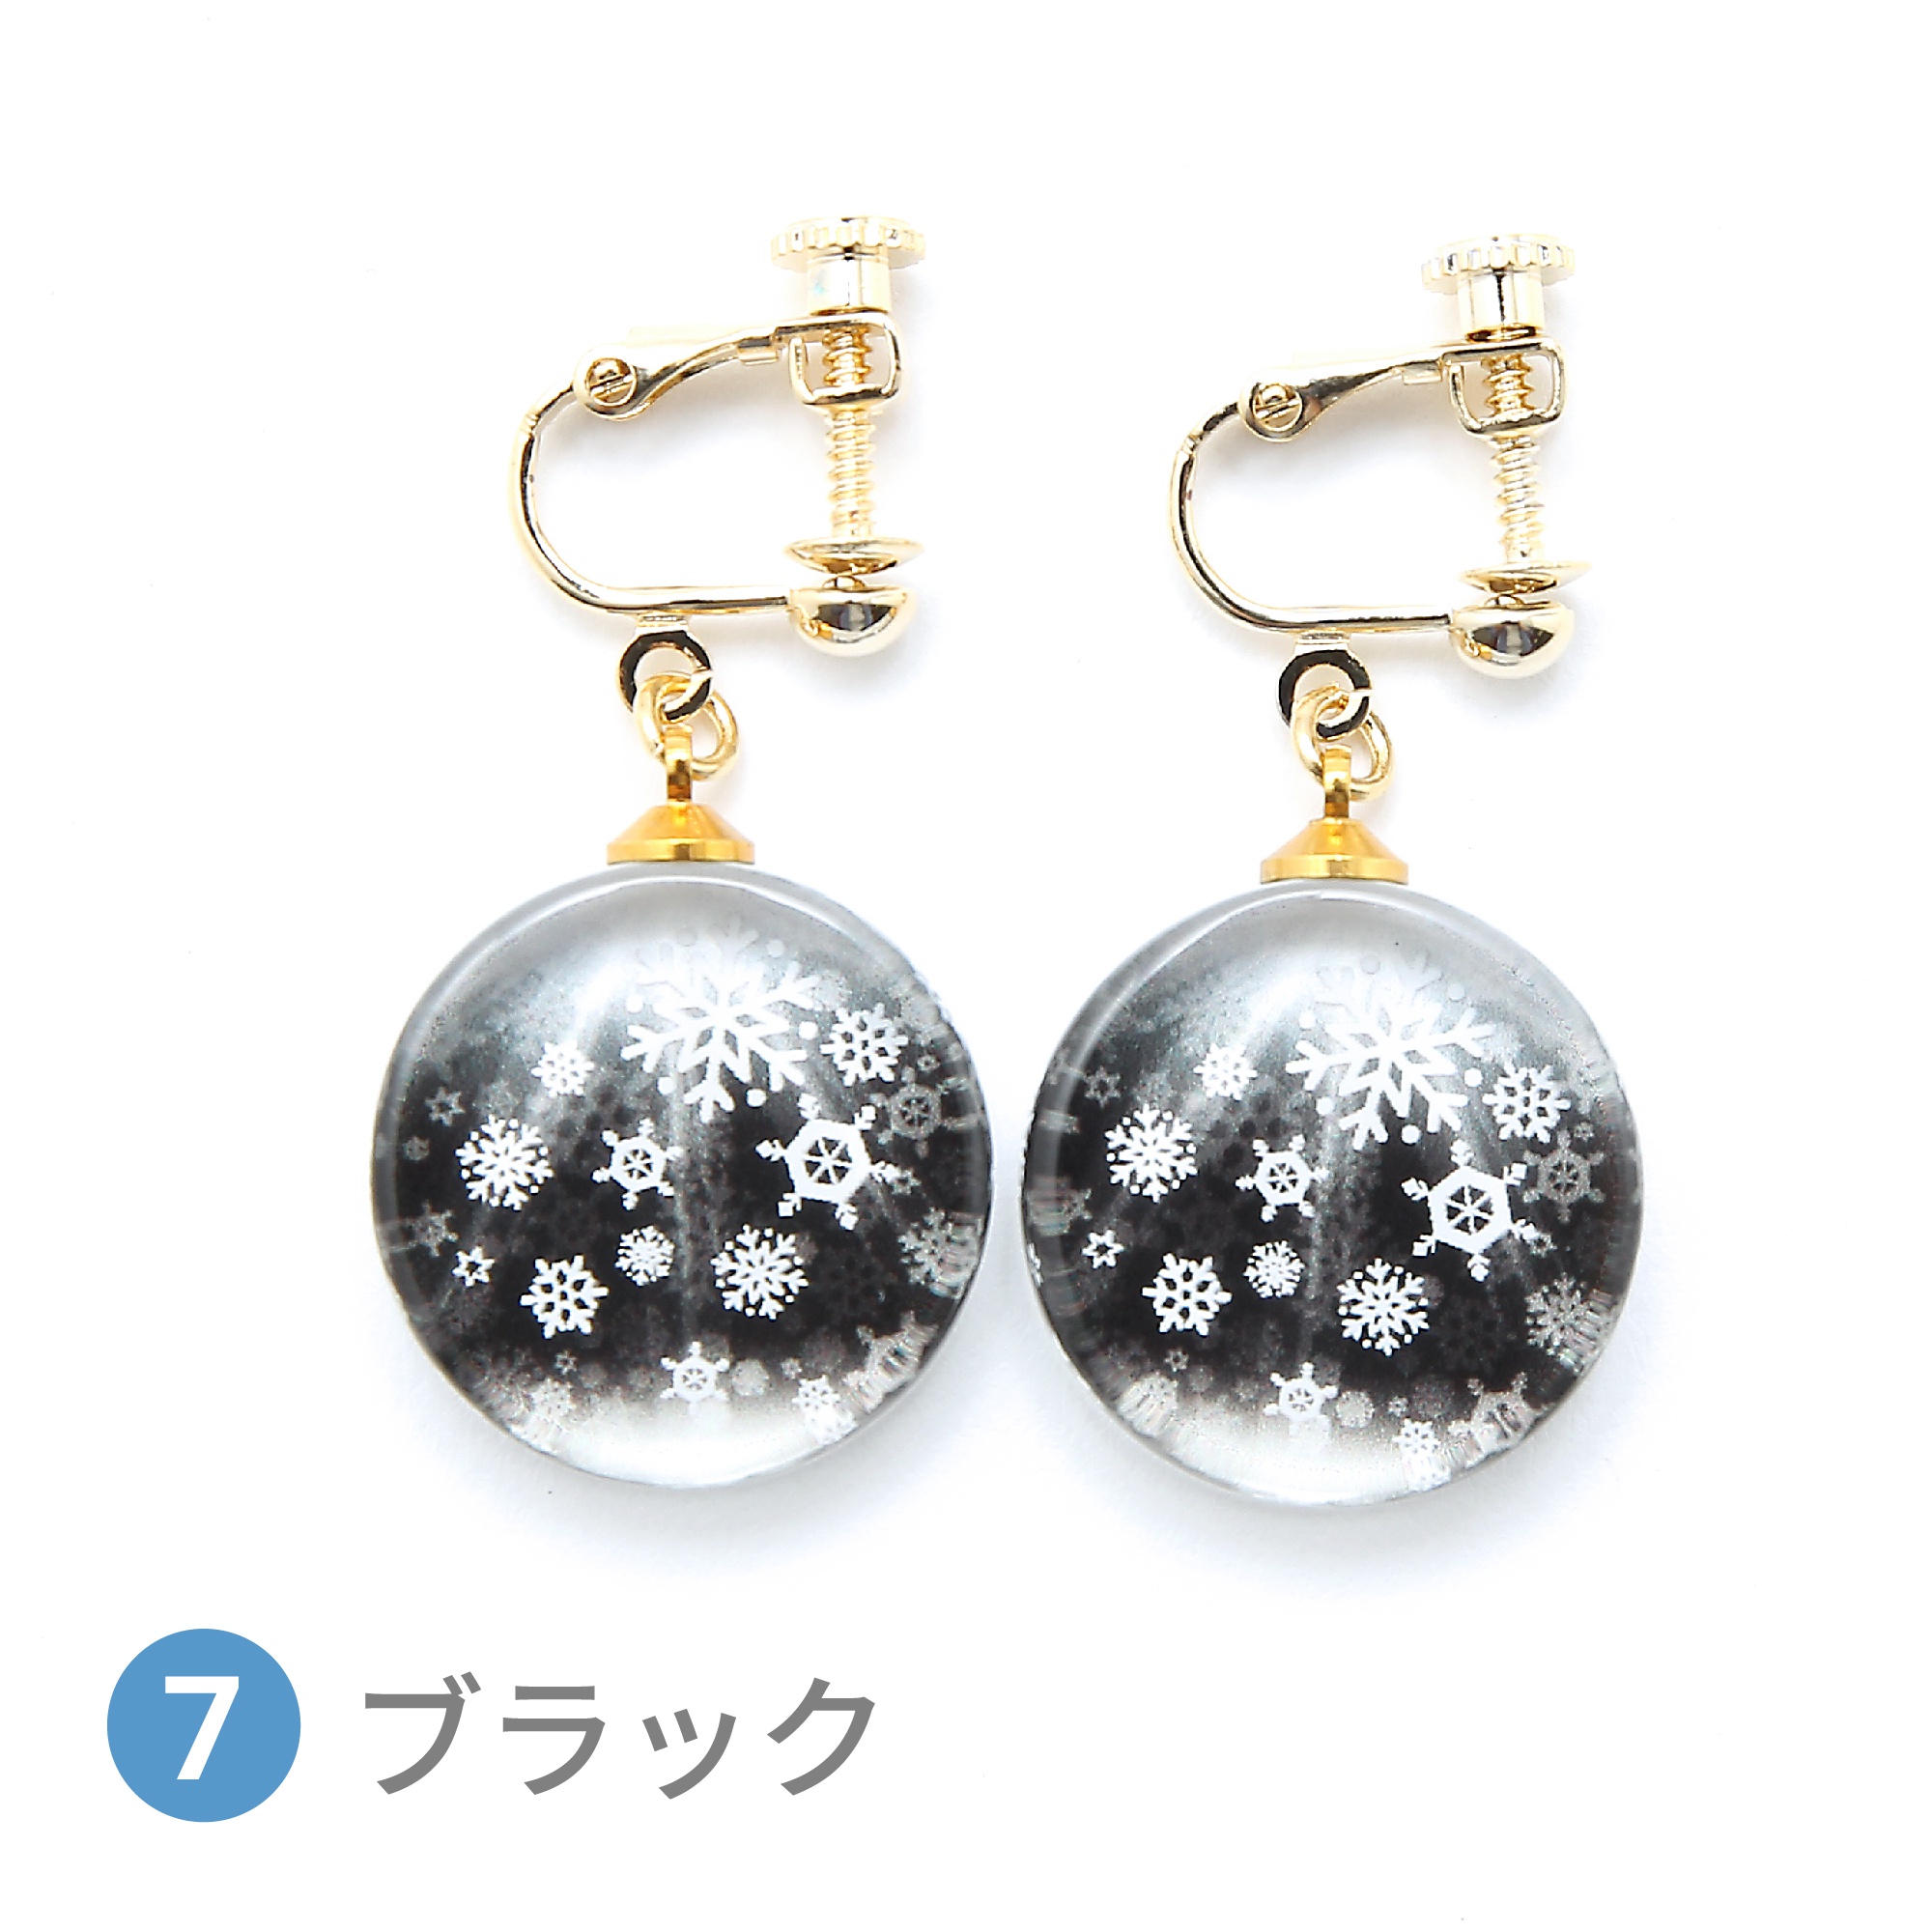 Glass accessories Earring Shiny winter black round shape